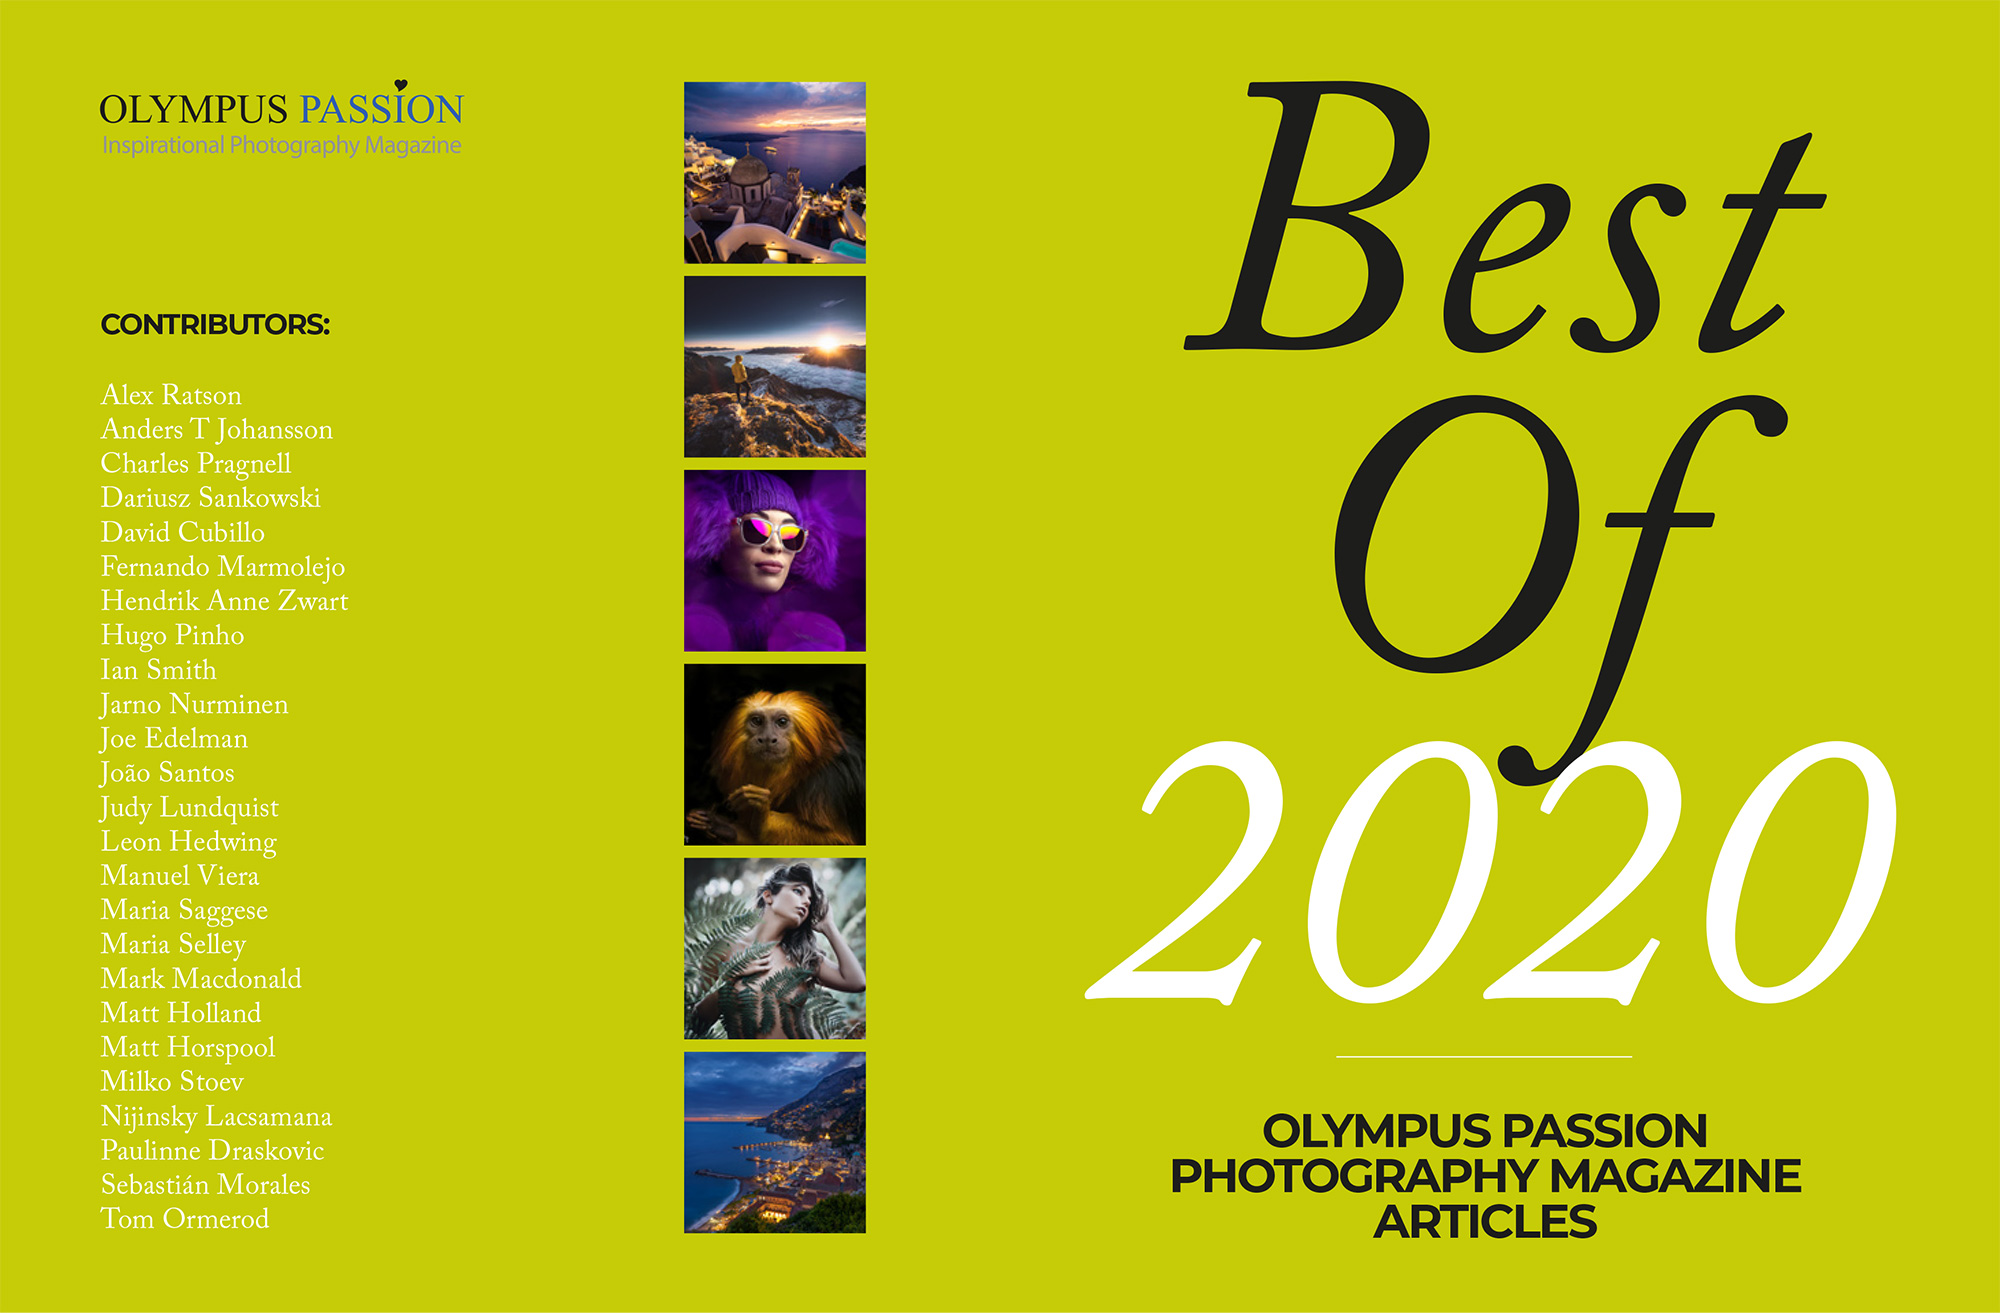 “Best Of” Olympus Passion Magazine – a Special Edition for the Summer 2020